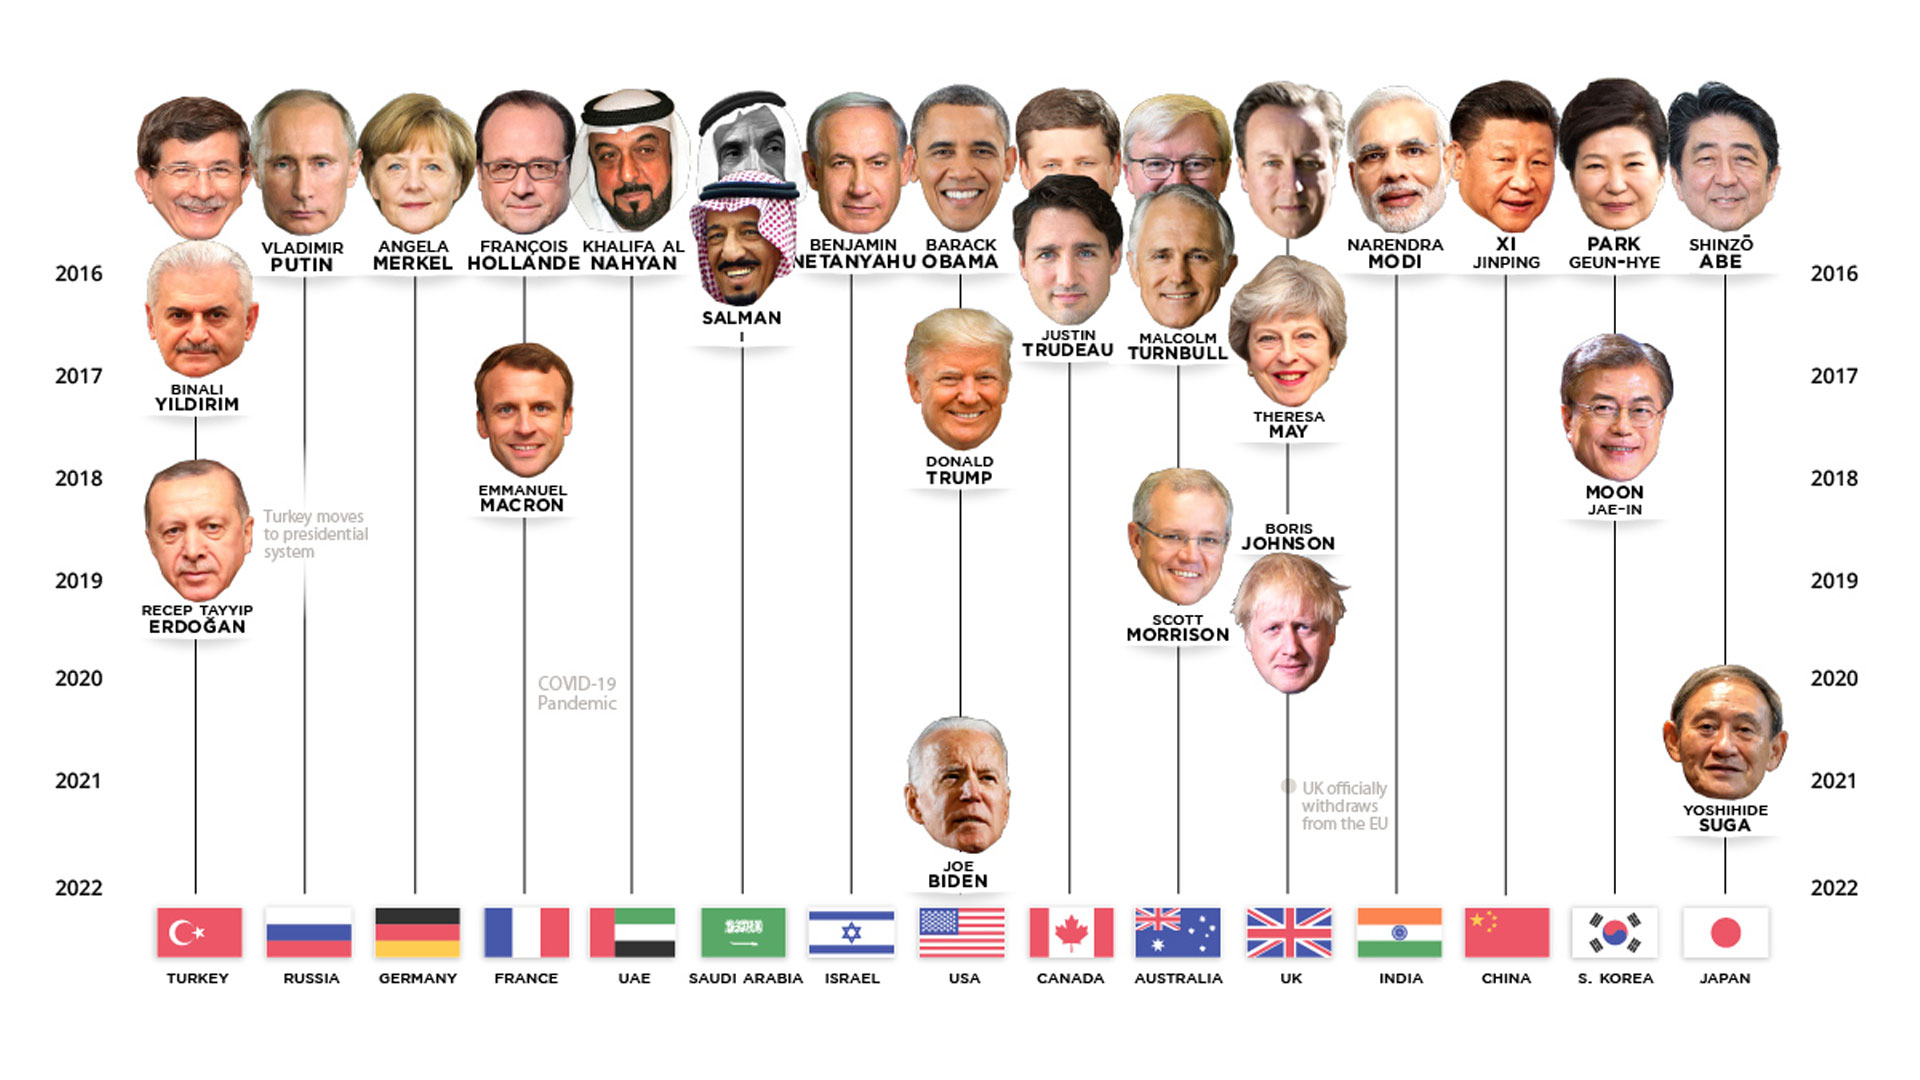 The World Leaders in Positions of Power • Forbes